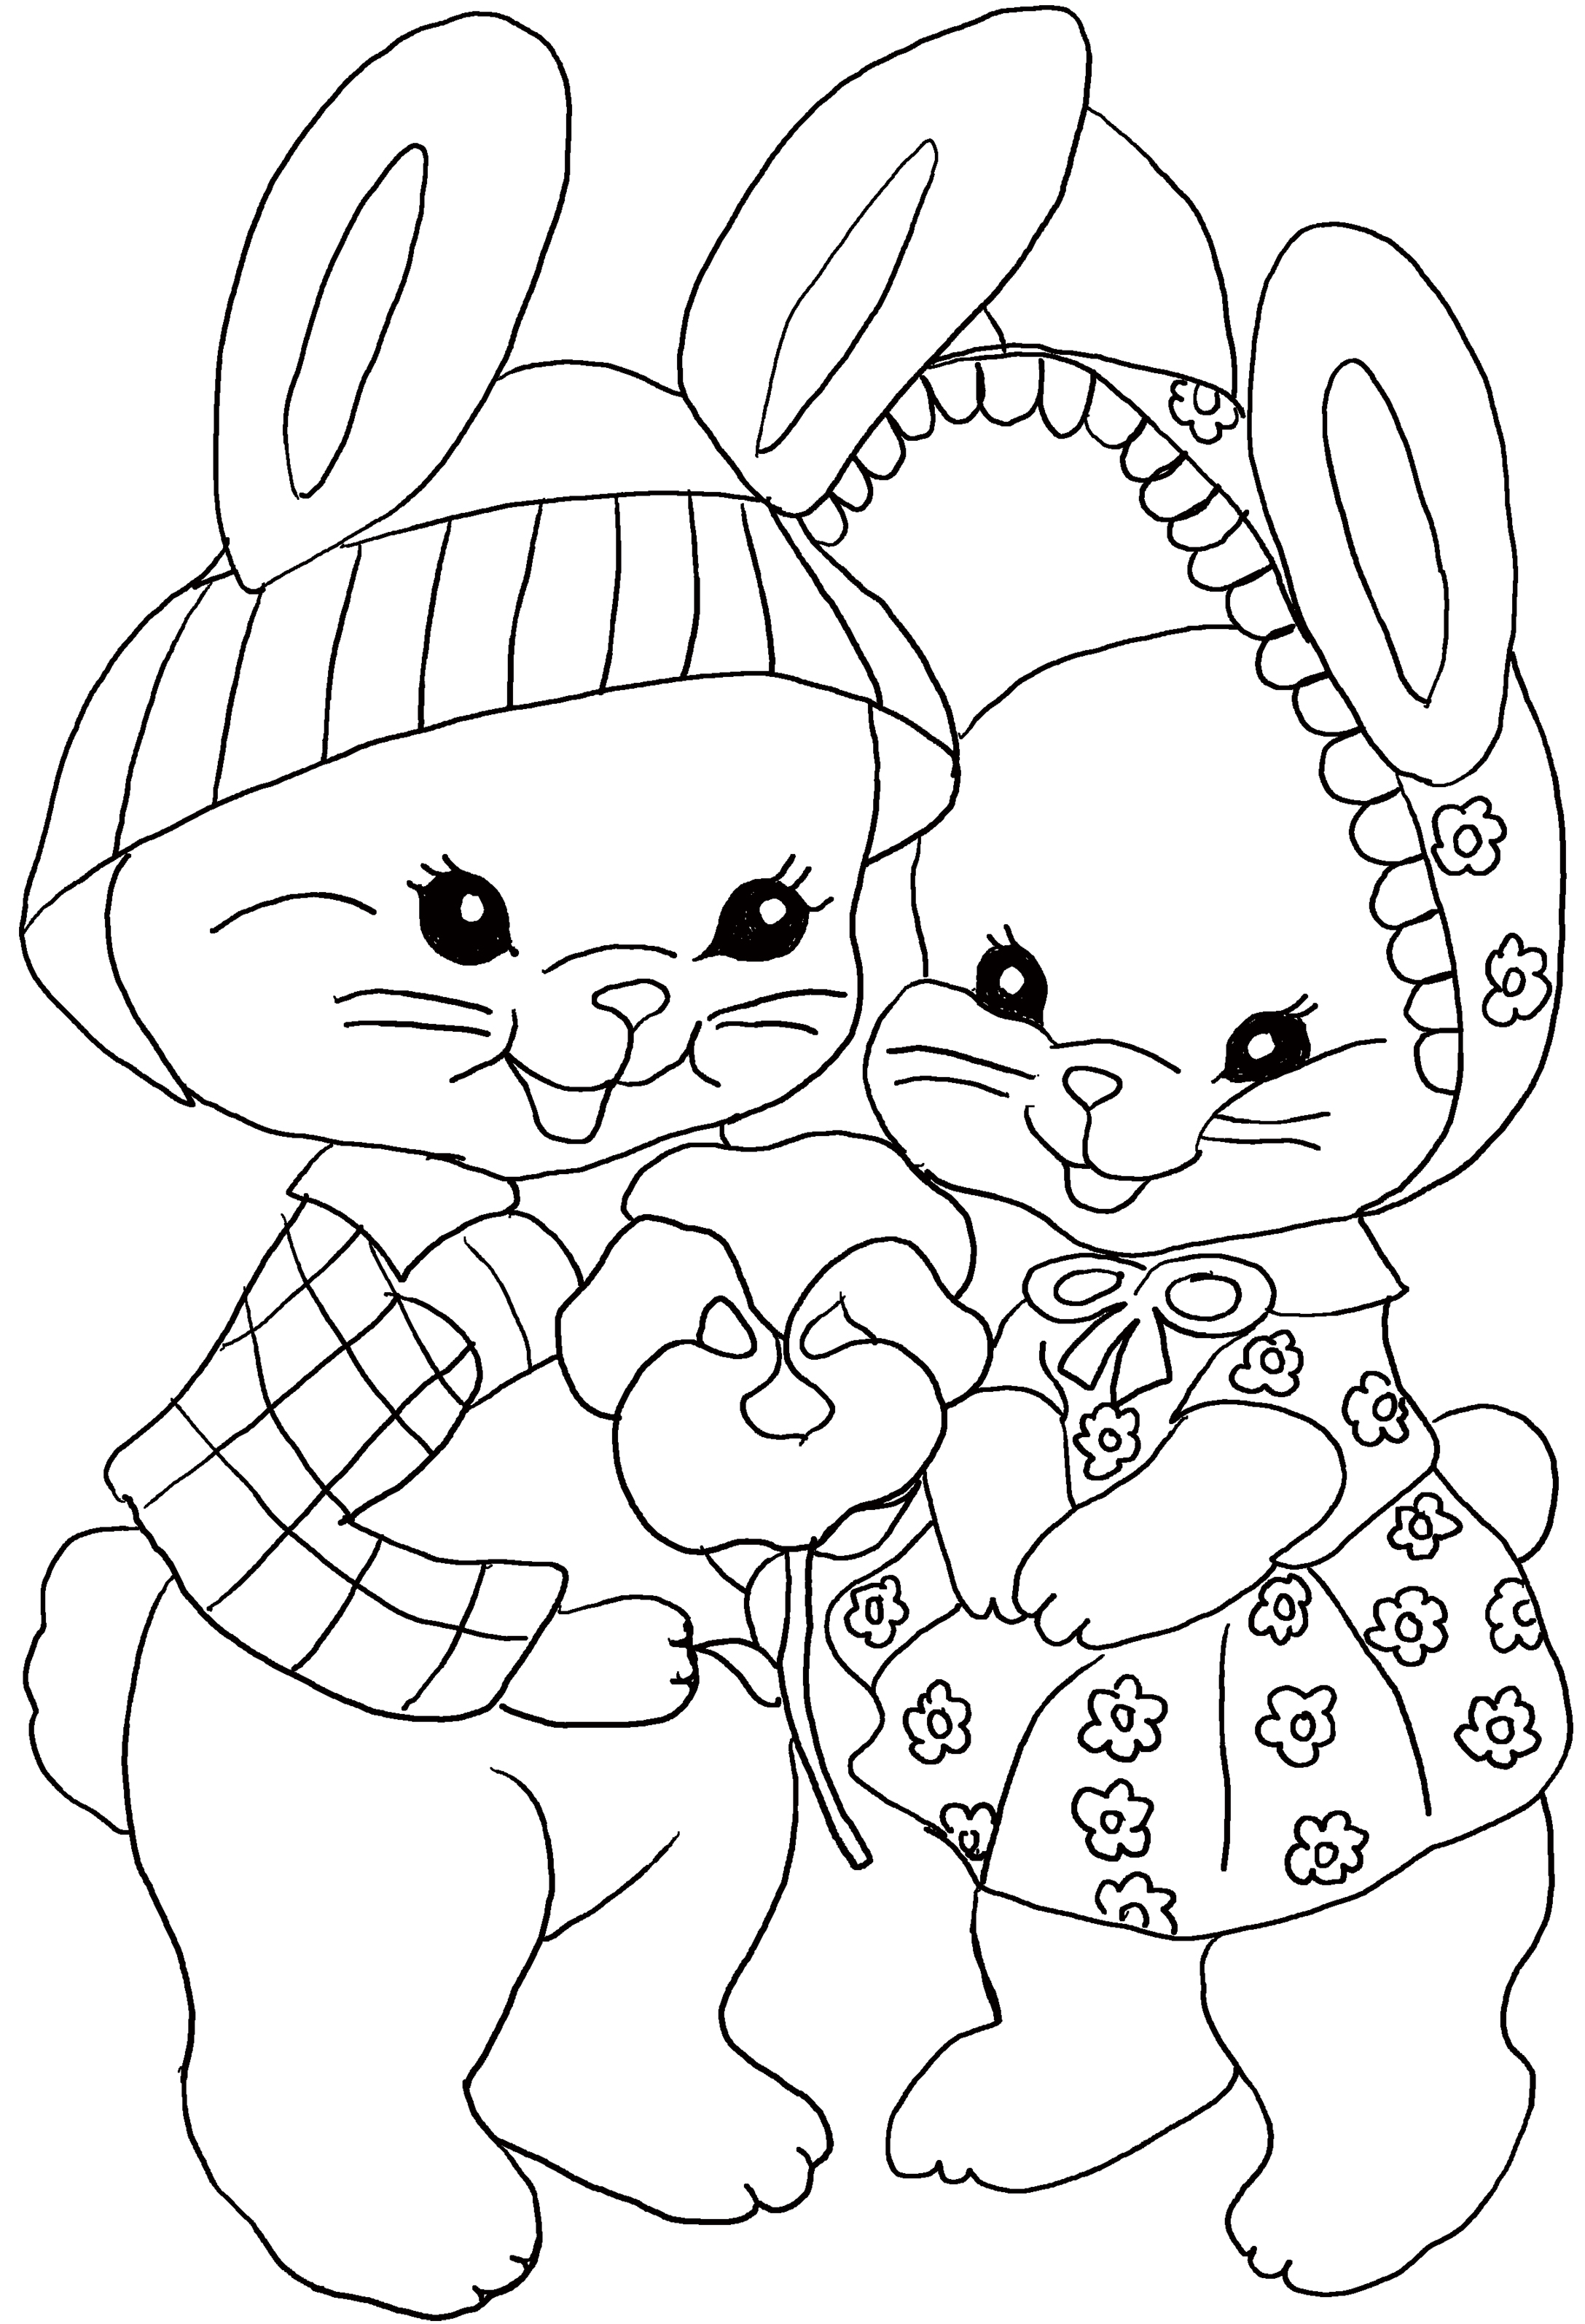 Pictures Of Bunnies To Coloring Coloring cute rabbit popular color